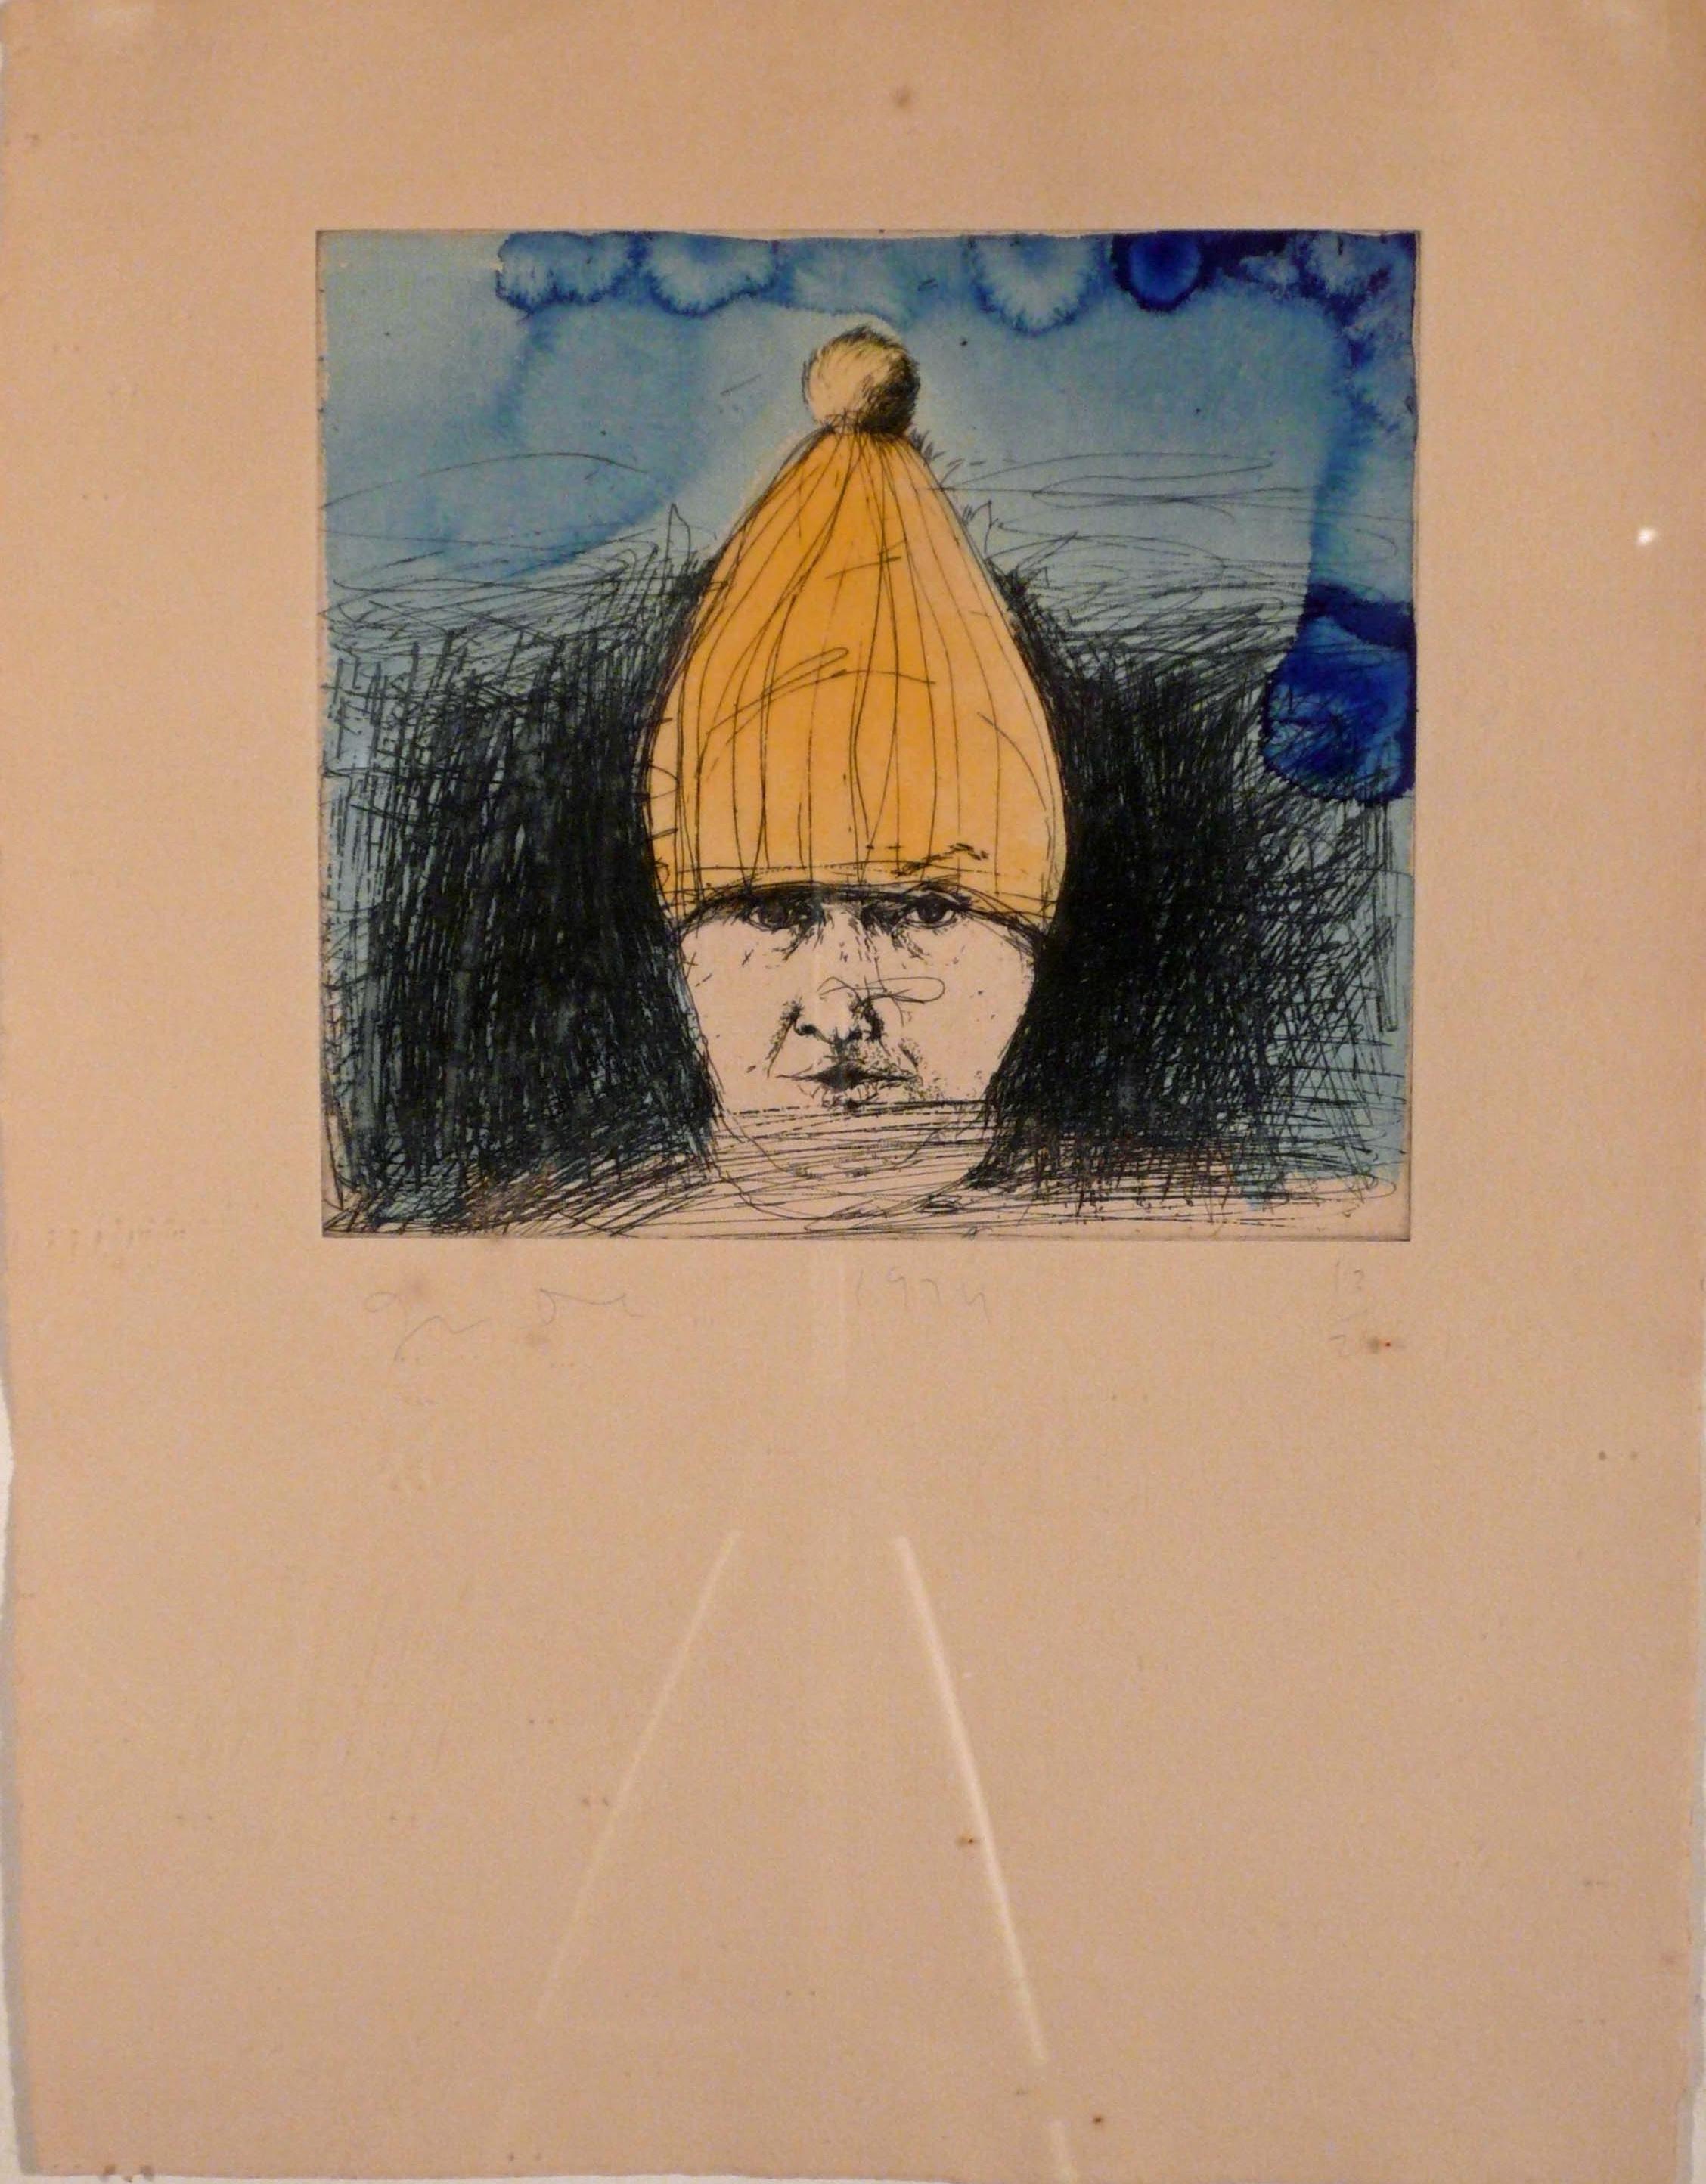 Dine, Jim.  SELF PORTRAIT IN A SKI HAT. Williams College 176-179.
Etchings, 1974. The complete set of four states as published by
Petersburg Press, NY, and printed by Alan Uglow and Winston
Roeth:

First State: Color portrait. Edition of 20 plus 7